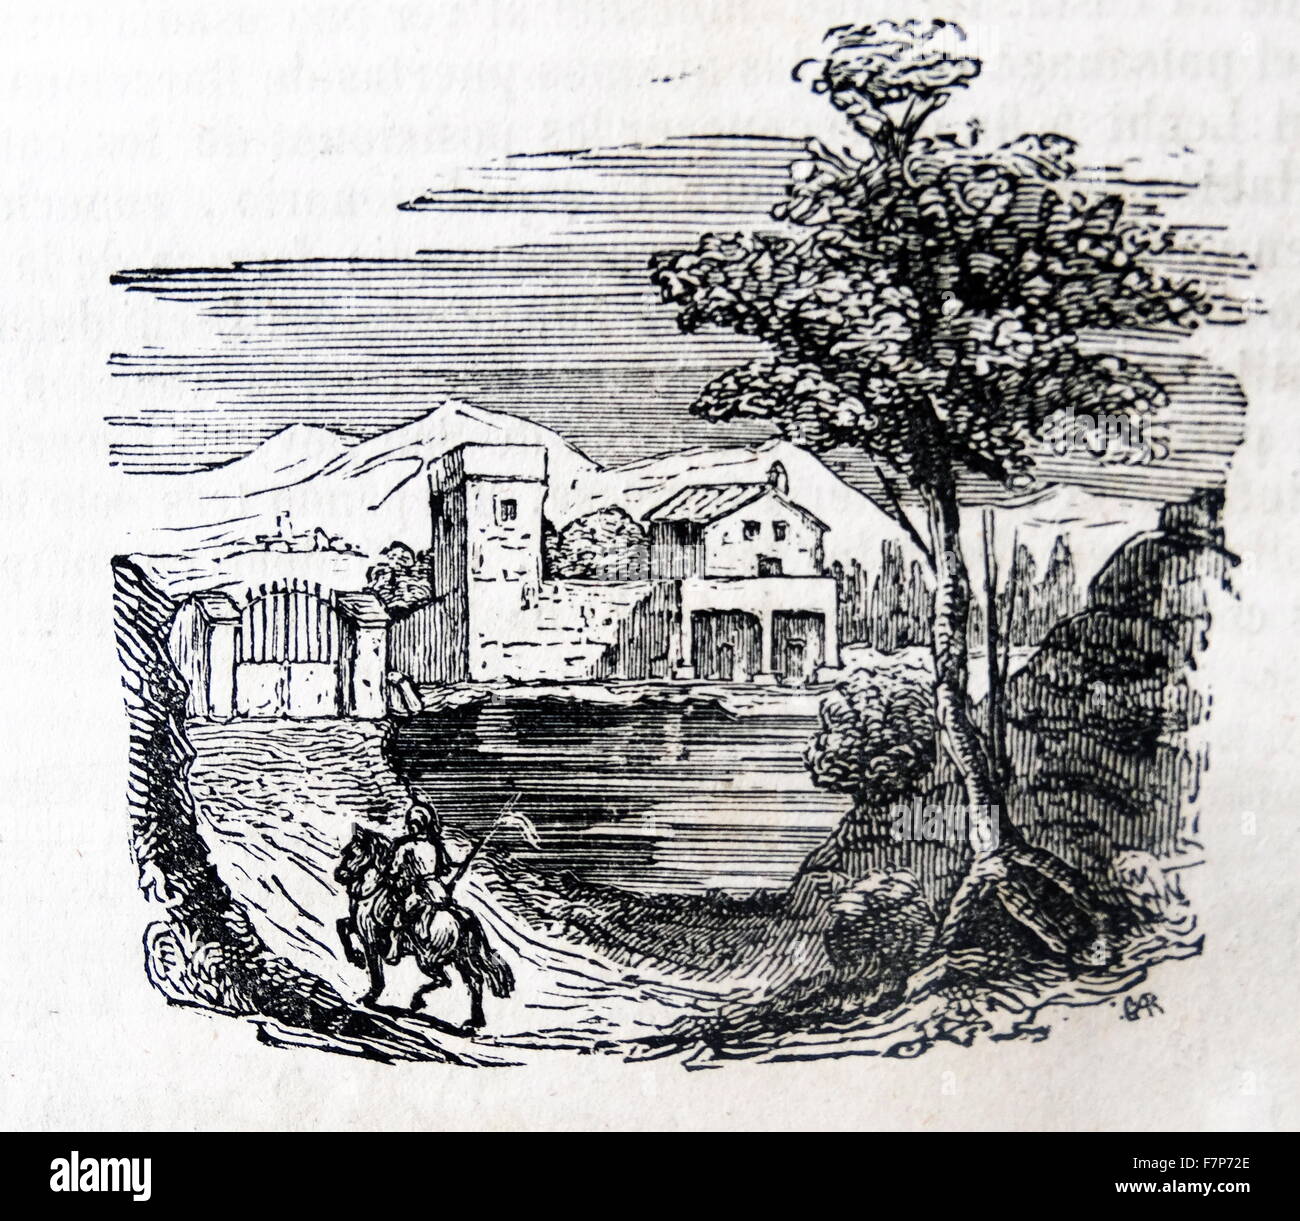 Illustration of a Spanish rebel arriving at a gated residence during the Peninsula War 1808 Stock Photo